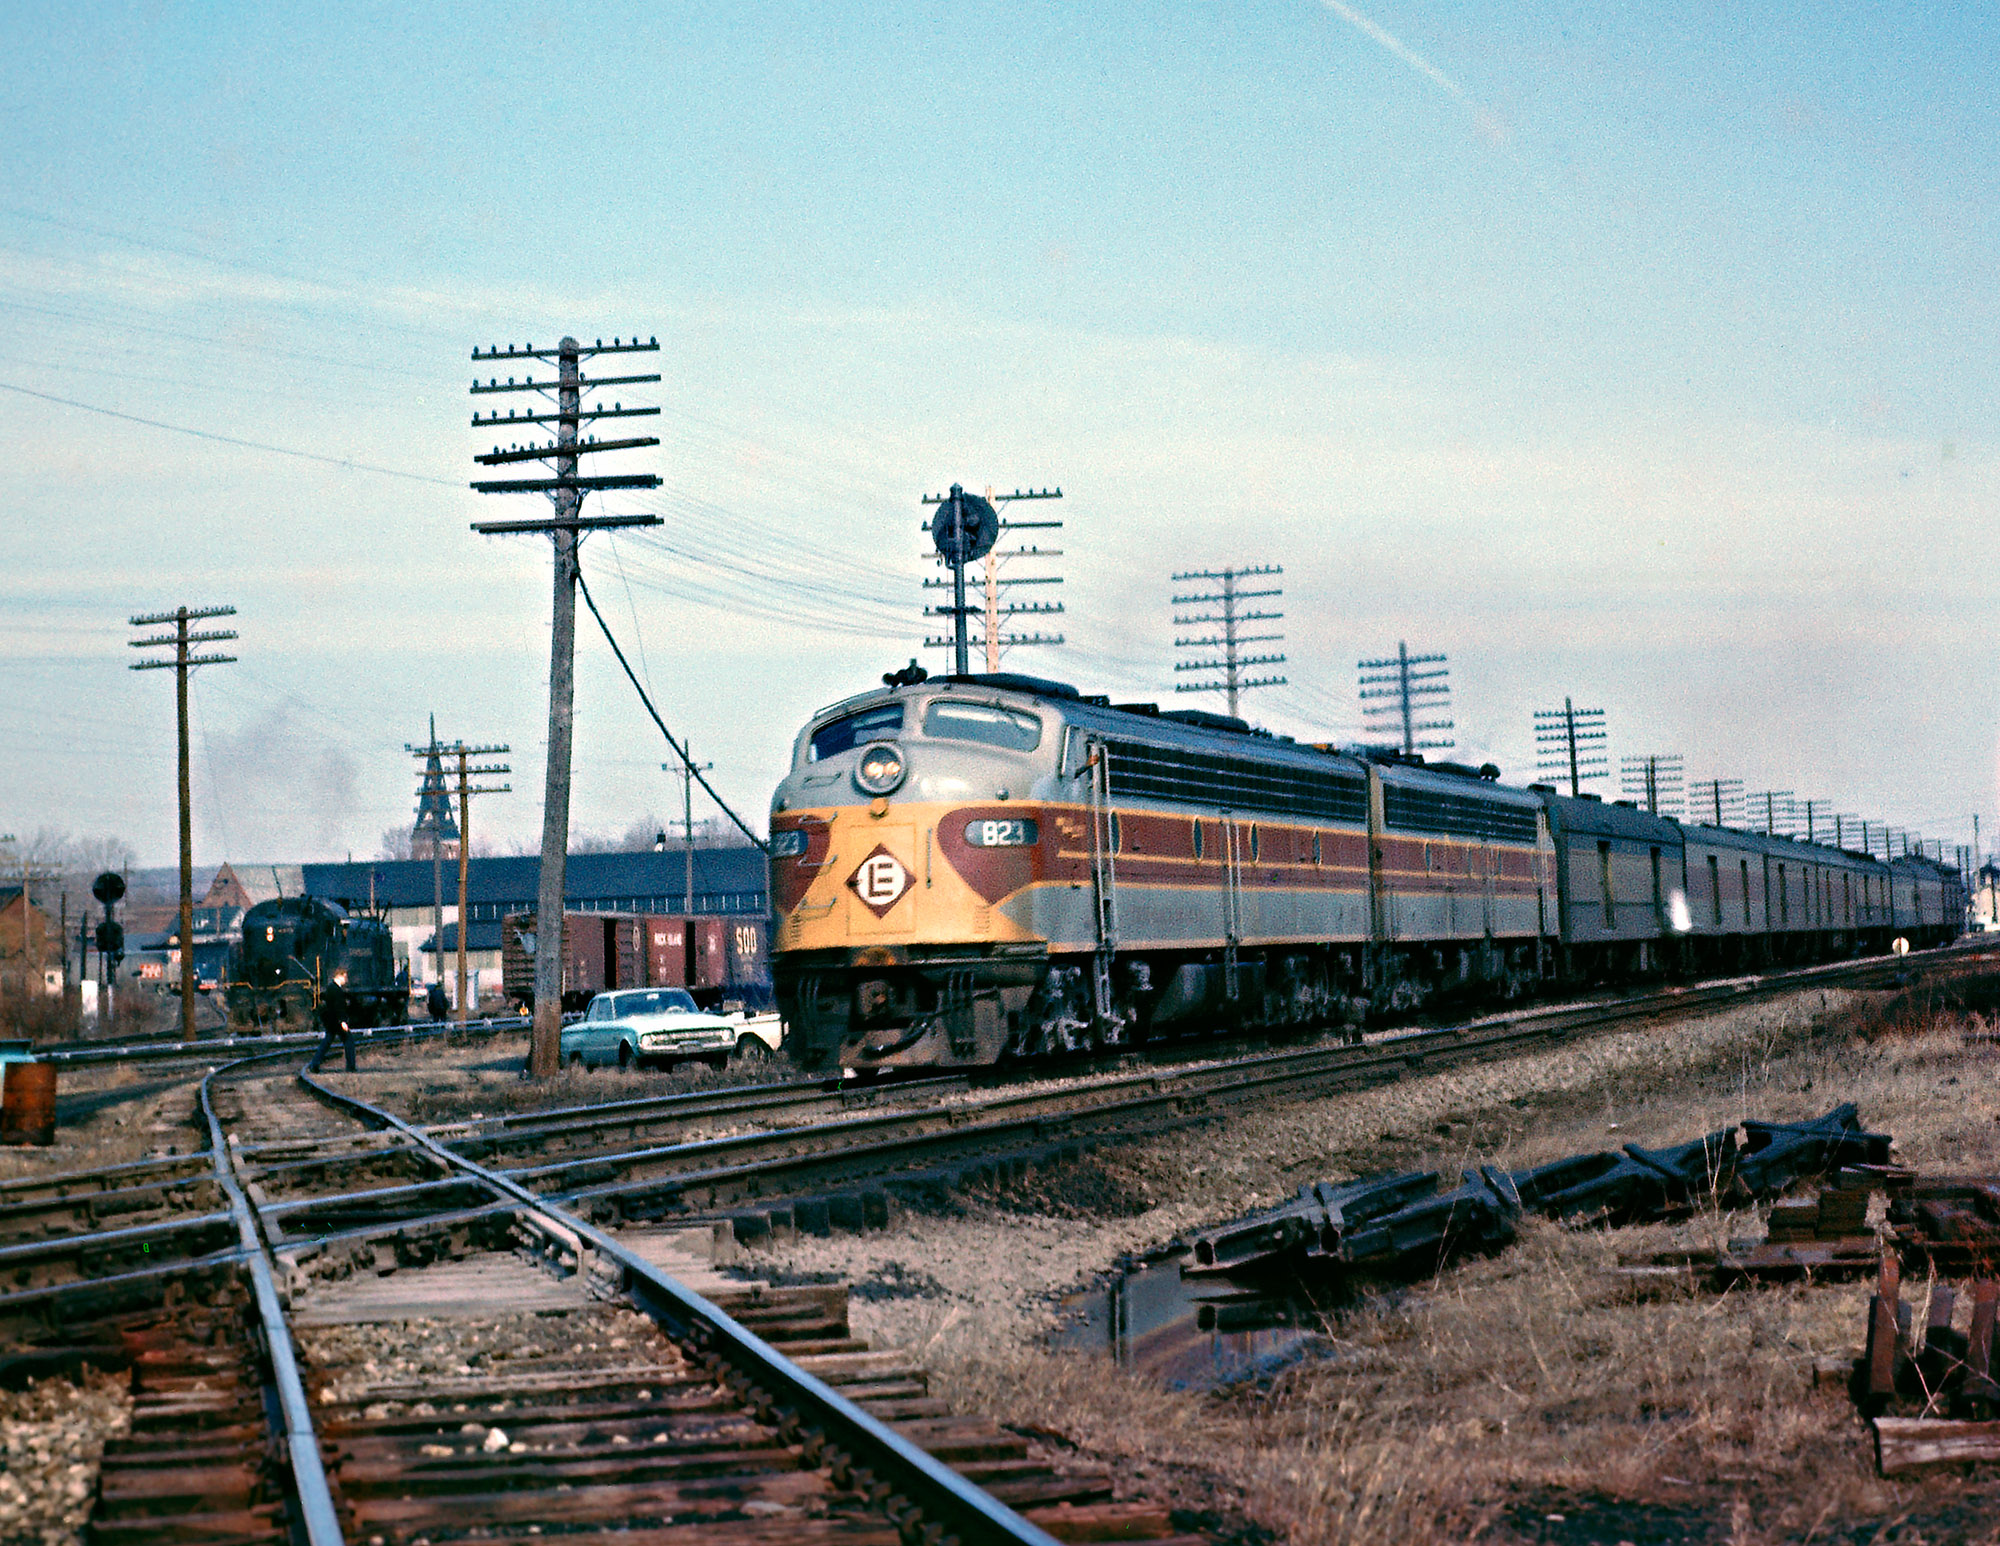 Erie Lackawanna's train 7, the Pacific Express, departs Corry, Pennsylvania westbound. It will arrive in Chicago in about 13 more hours, having stopped at every station on the route. An express it was not. Within a year the train will be discontinued, but Hoboken to Chicago service will continue with two other trains in each direction - Phoebe Snow and Lake Cities. Note the PRR Alco working in the distance. View full size.